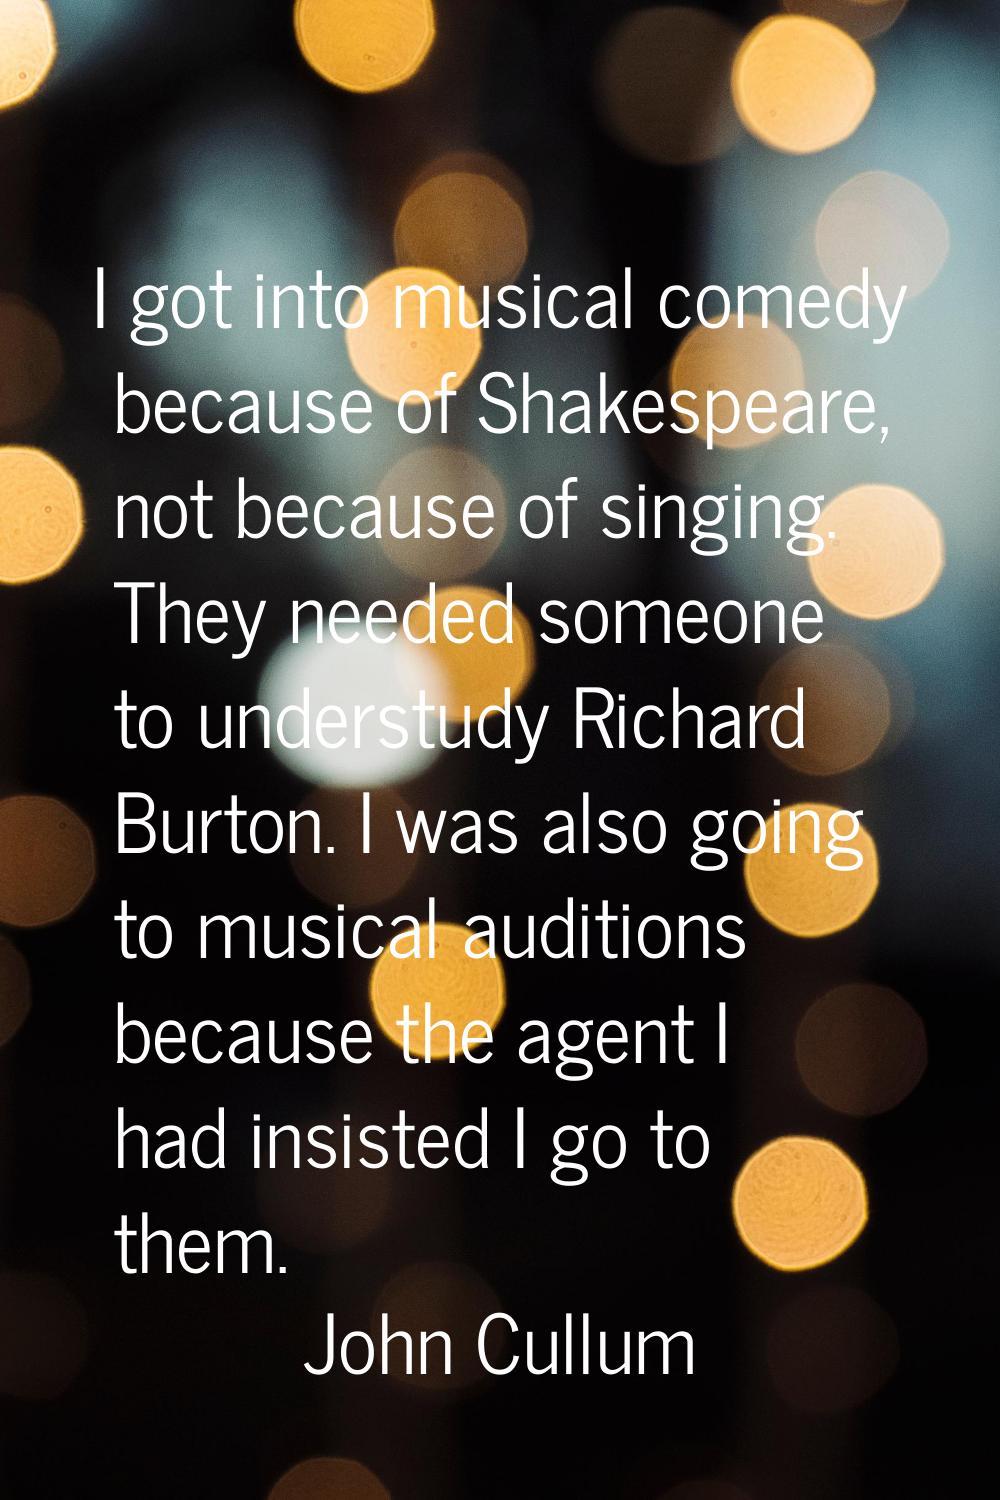 I got into musical comedy because of Shakespeare, not because of singing. They needed someone to un